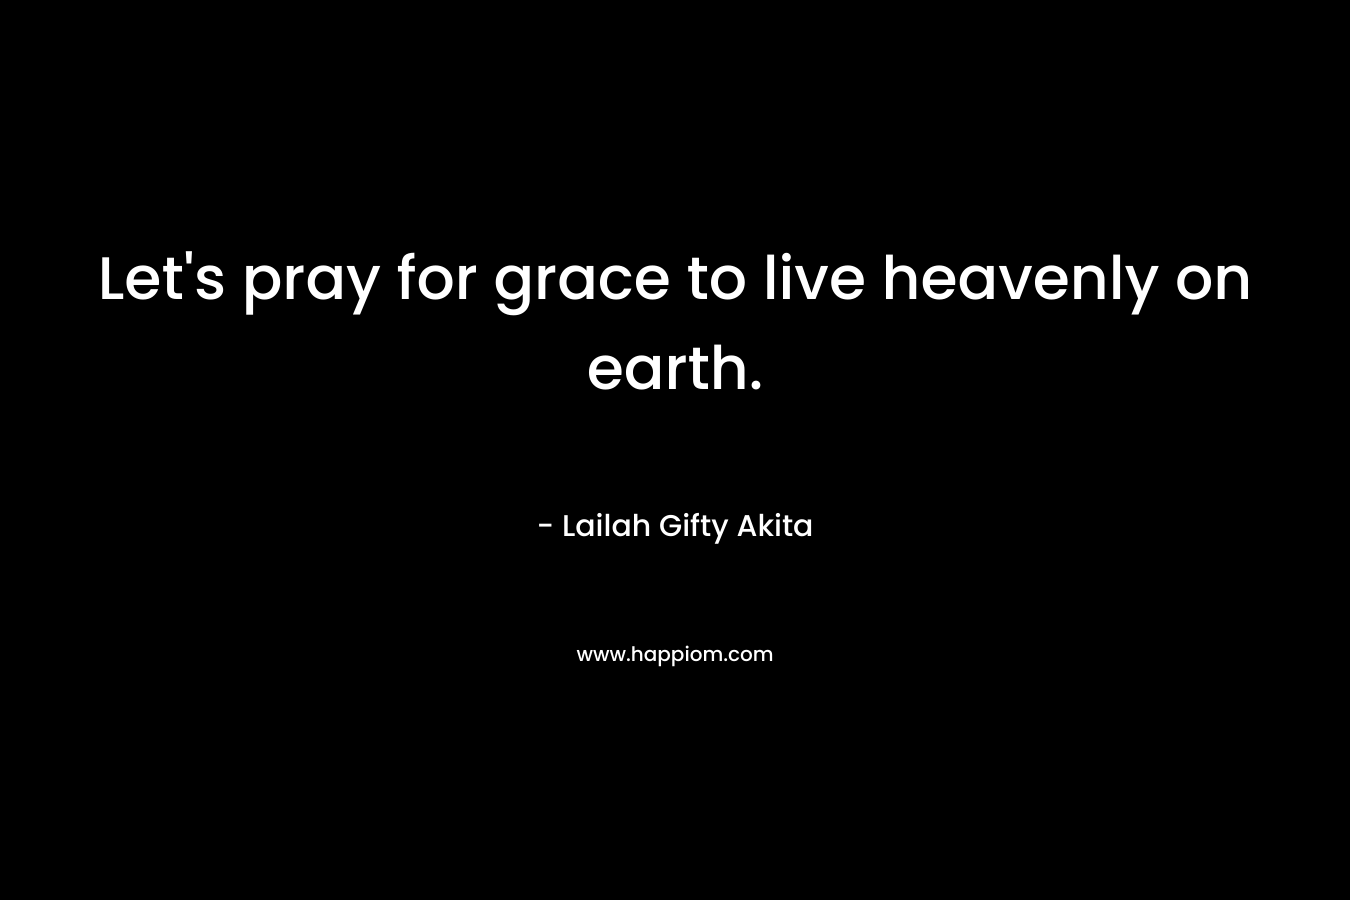 Let's pray for grace to live heavenly on earth.